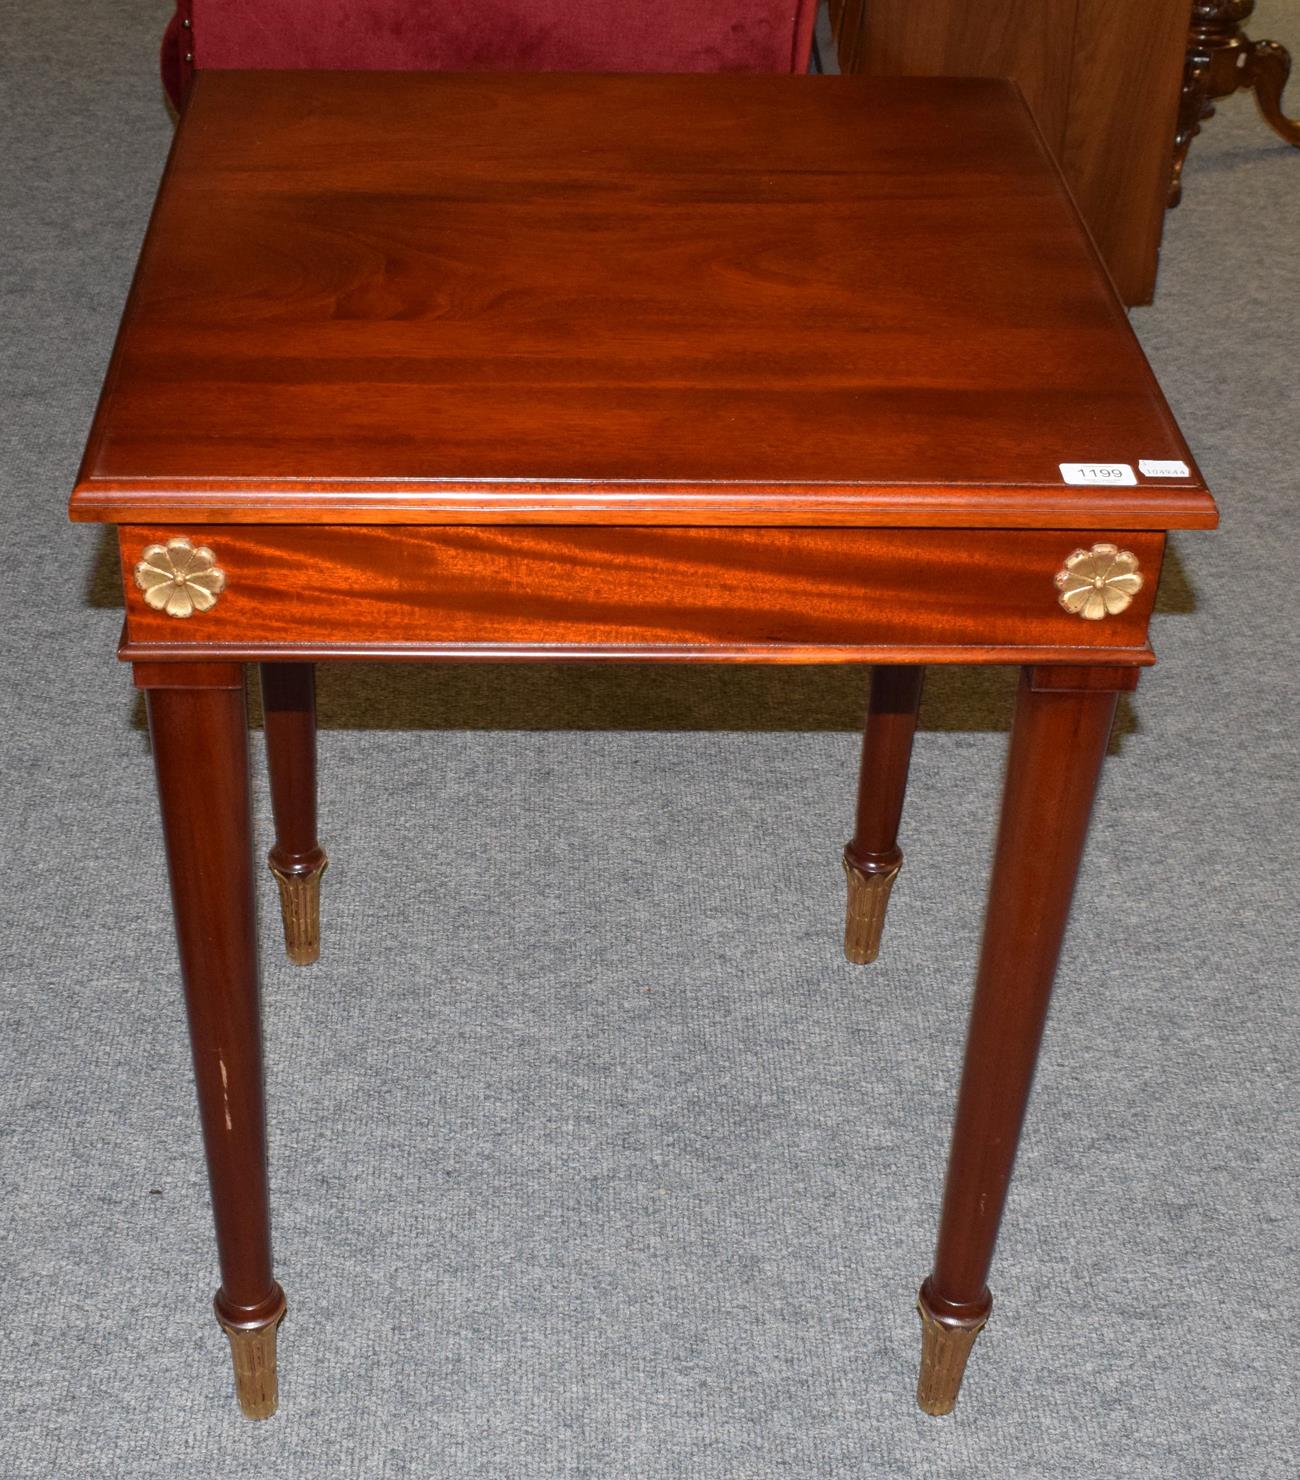 Lot 1199 - A lamp table made by Anthony Nixon, bespoke furniture maker, Barnard Castle, 81cm high